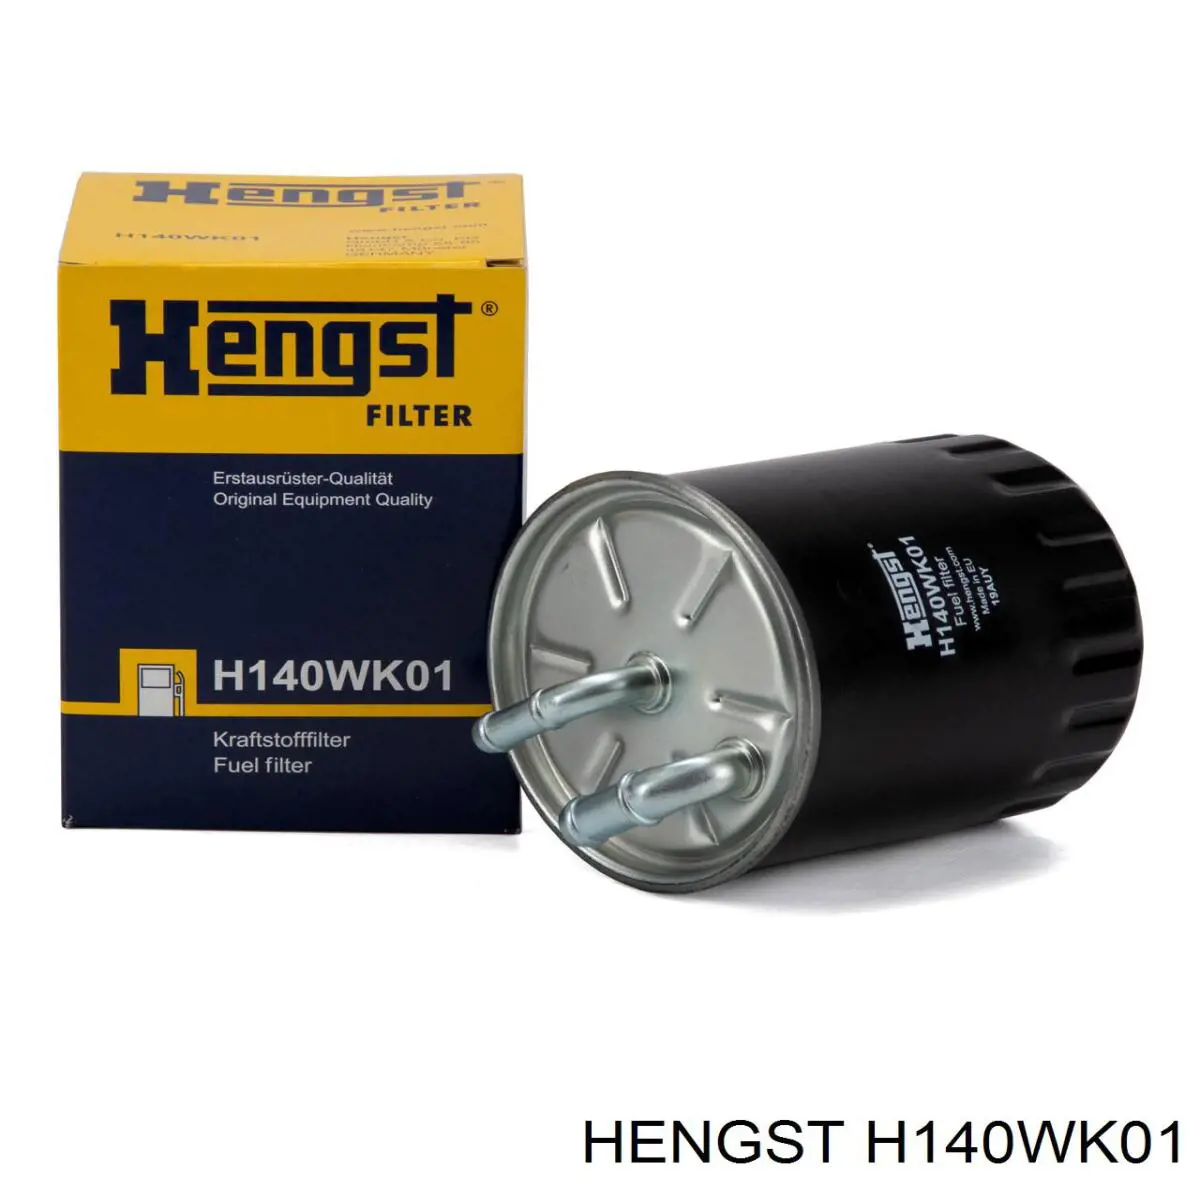 Filtro combustible H140WK01 Hengst